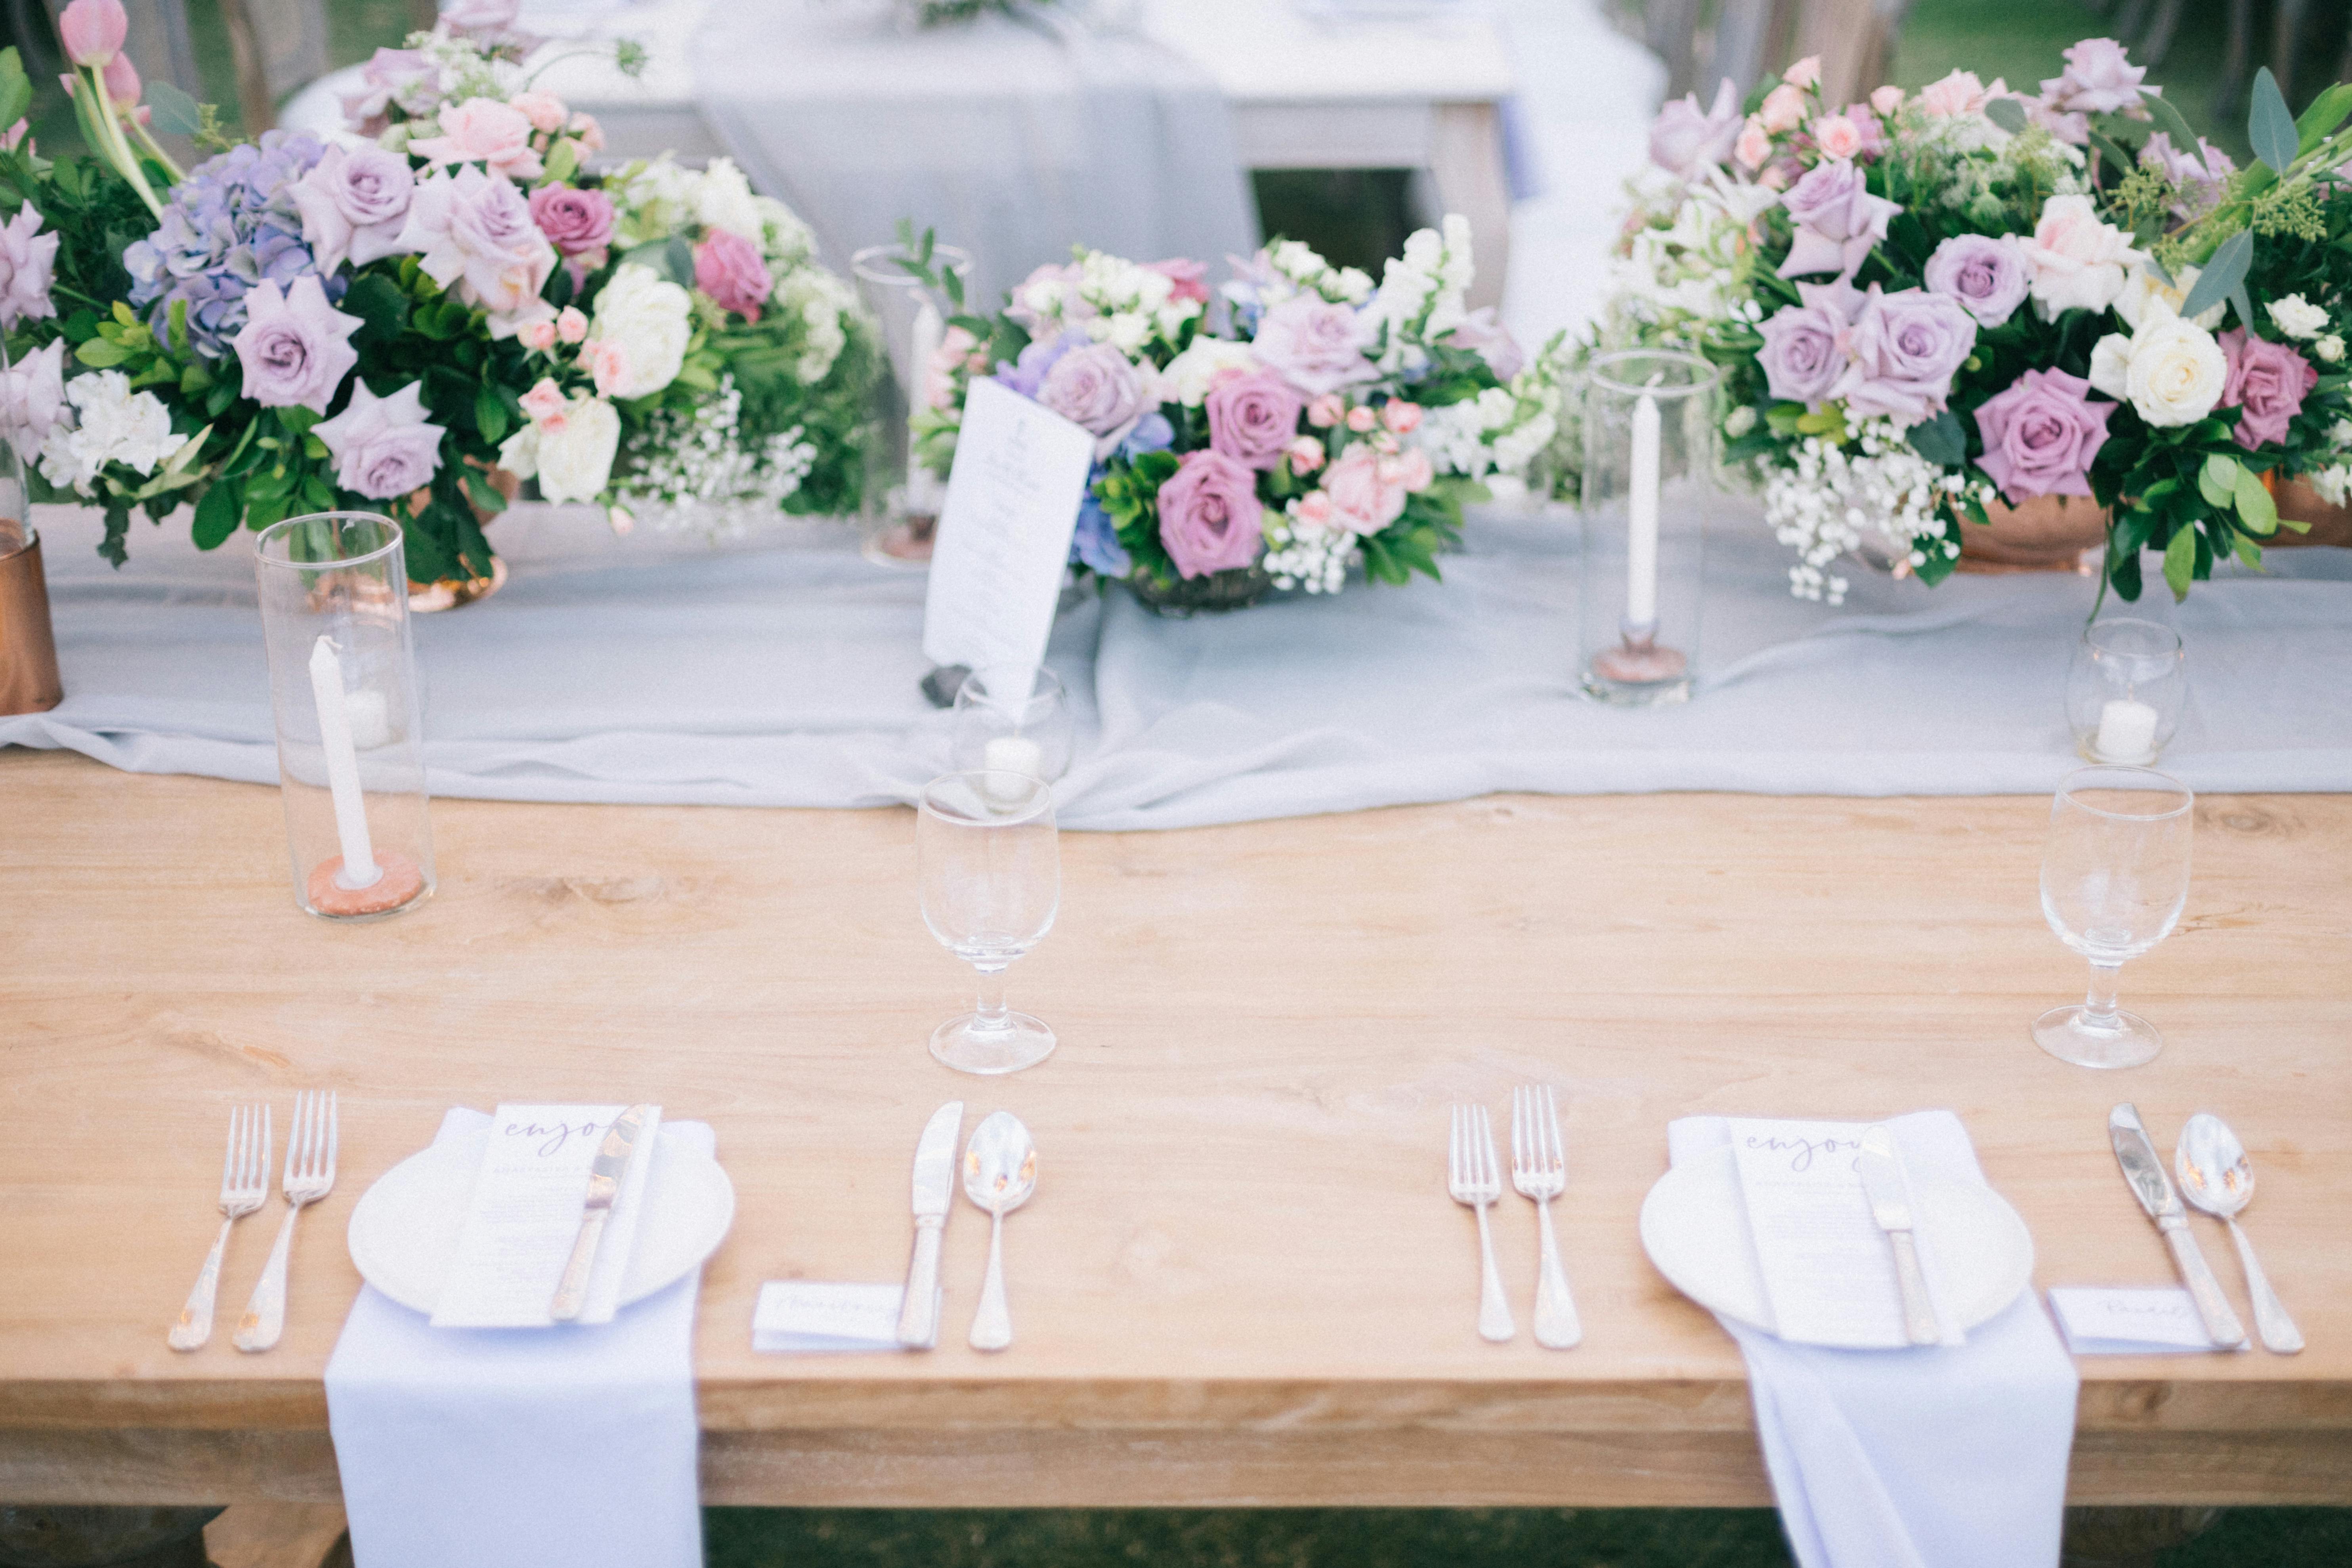 A wedding table | Source: Pexels